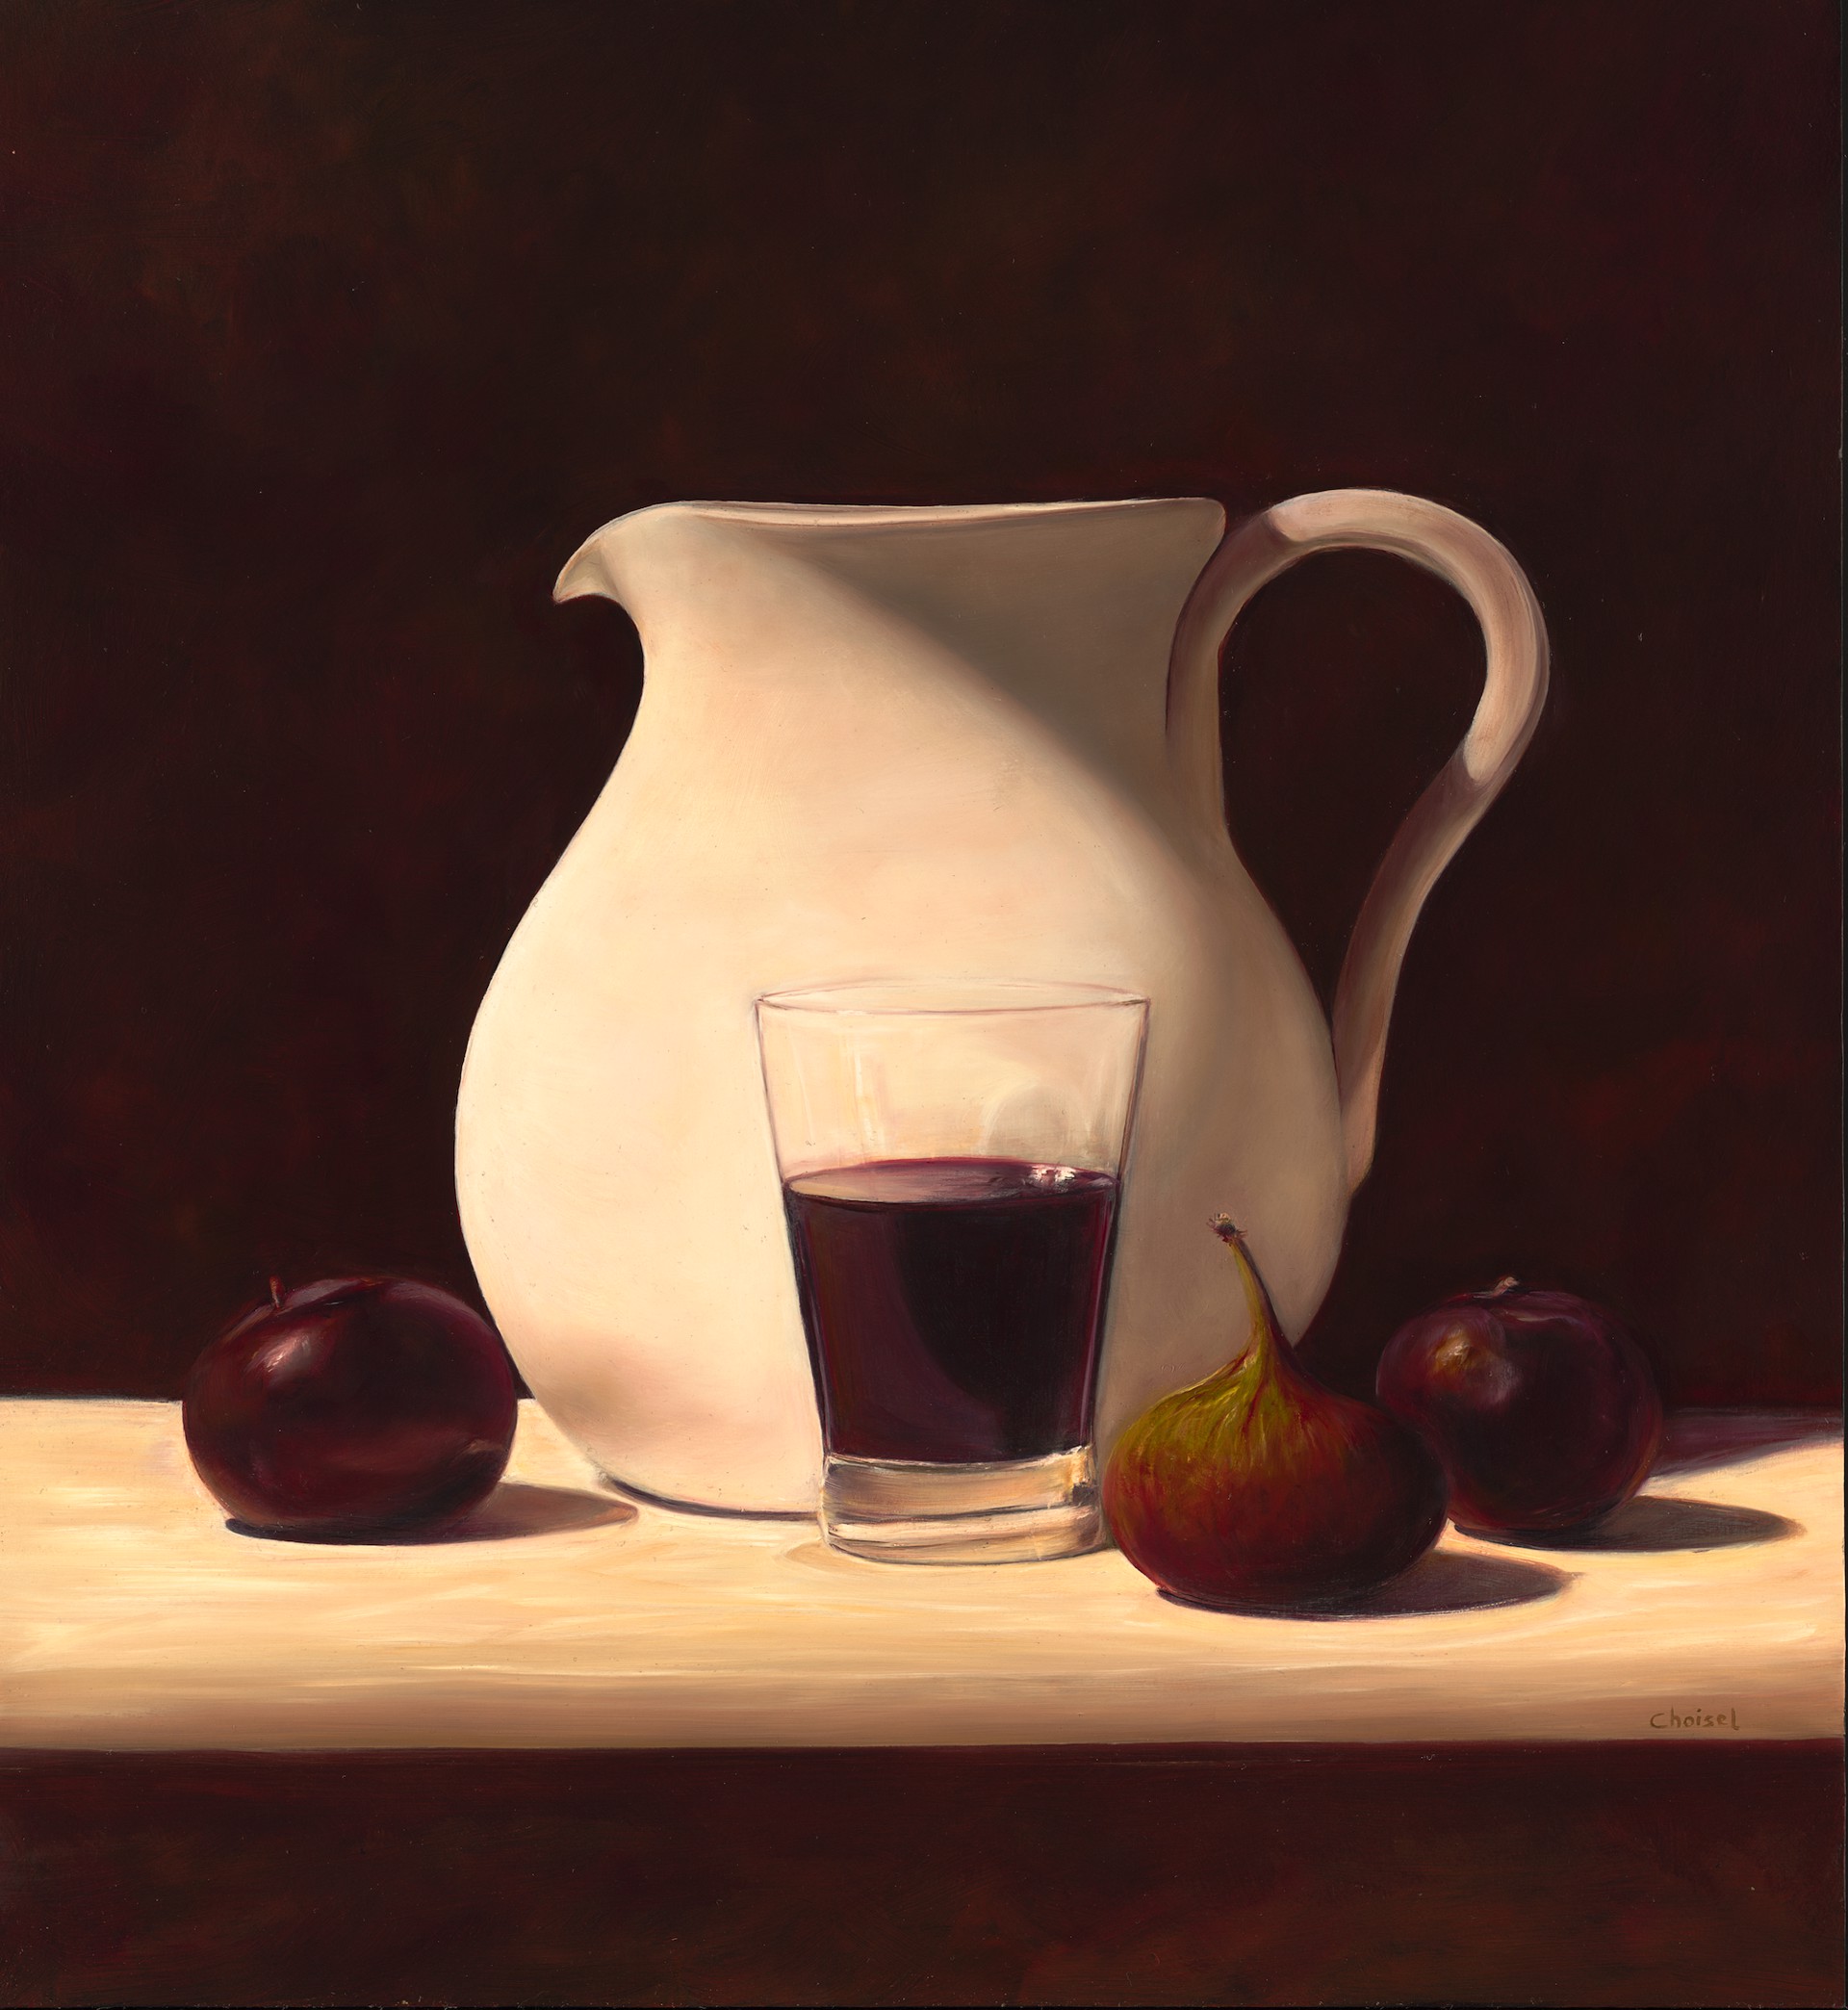 Pitcher, Plums and Wine by Frederic Choisel